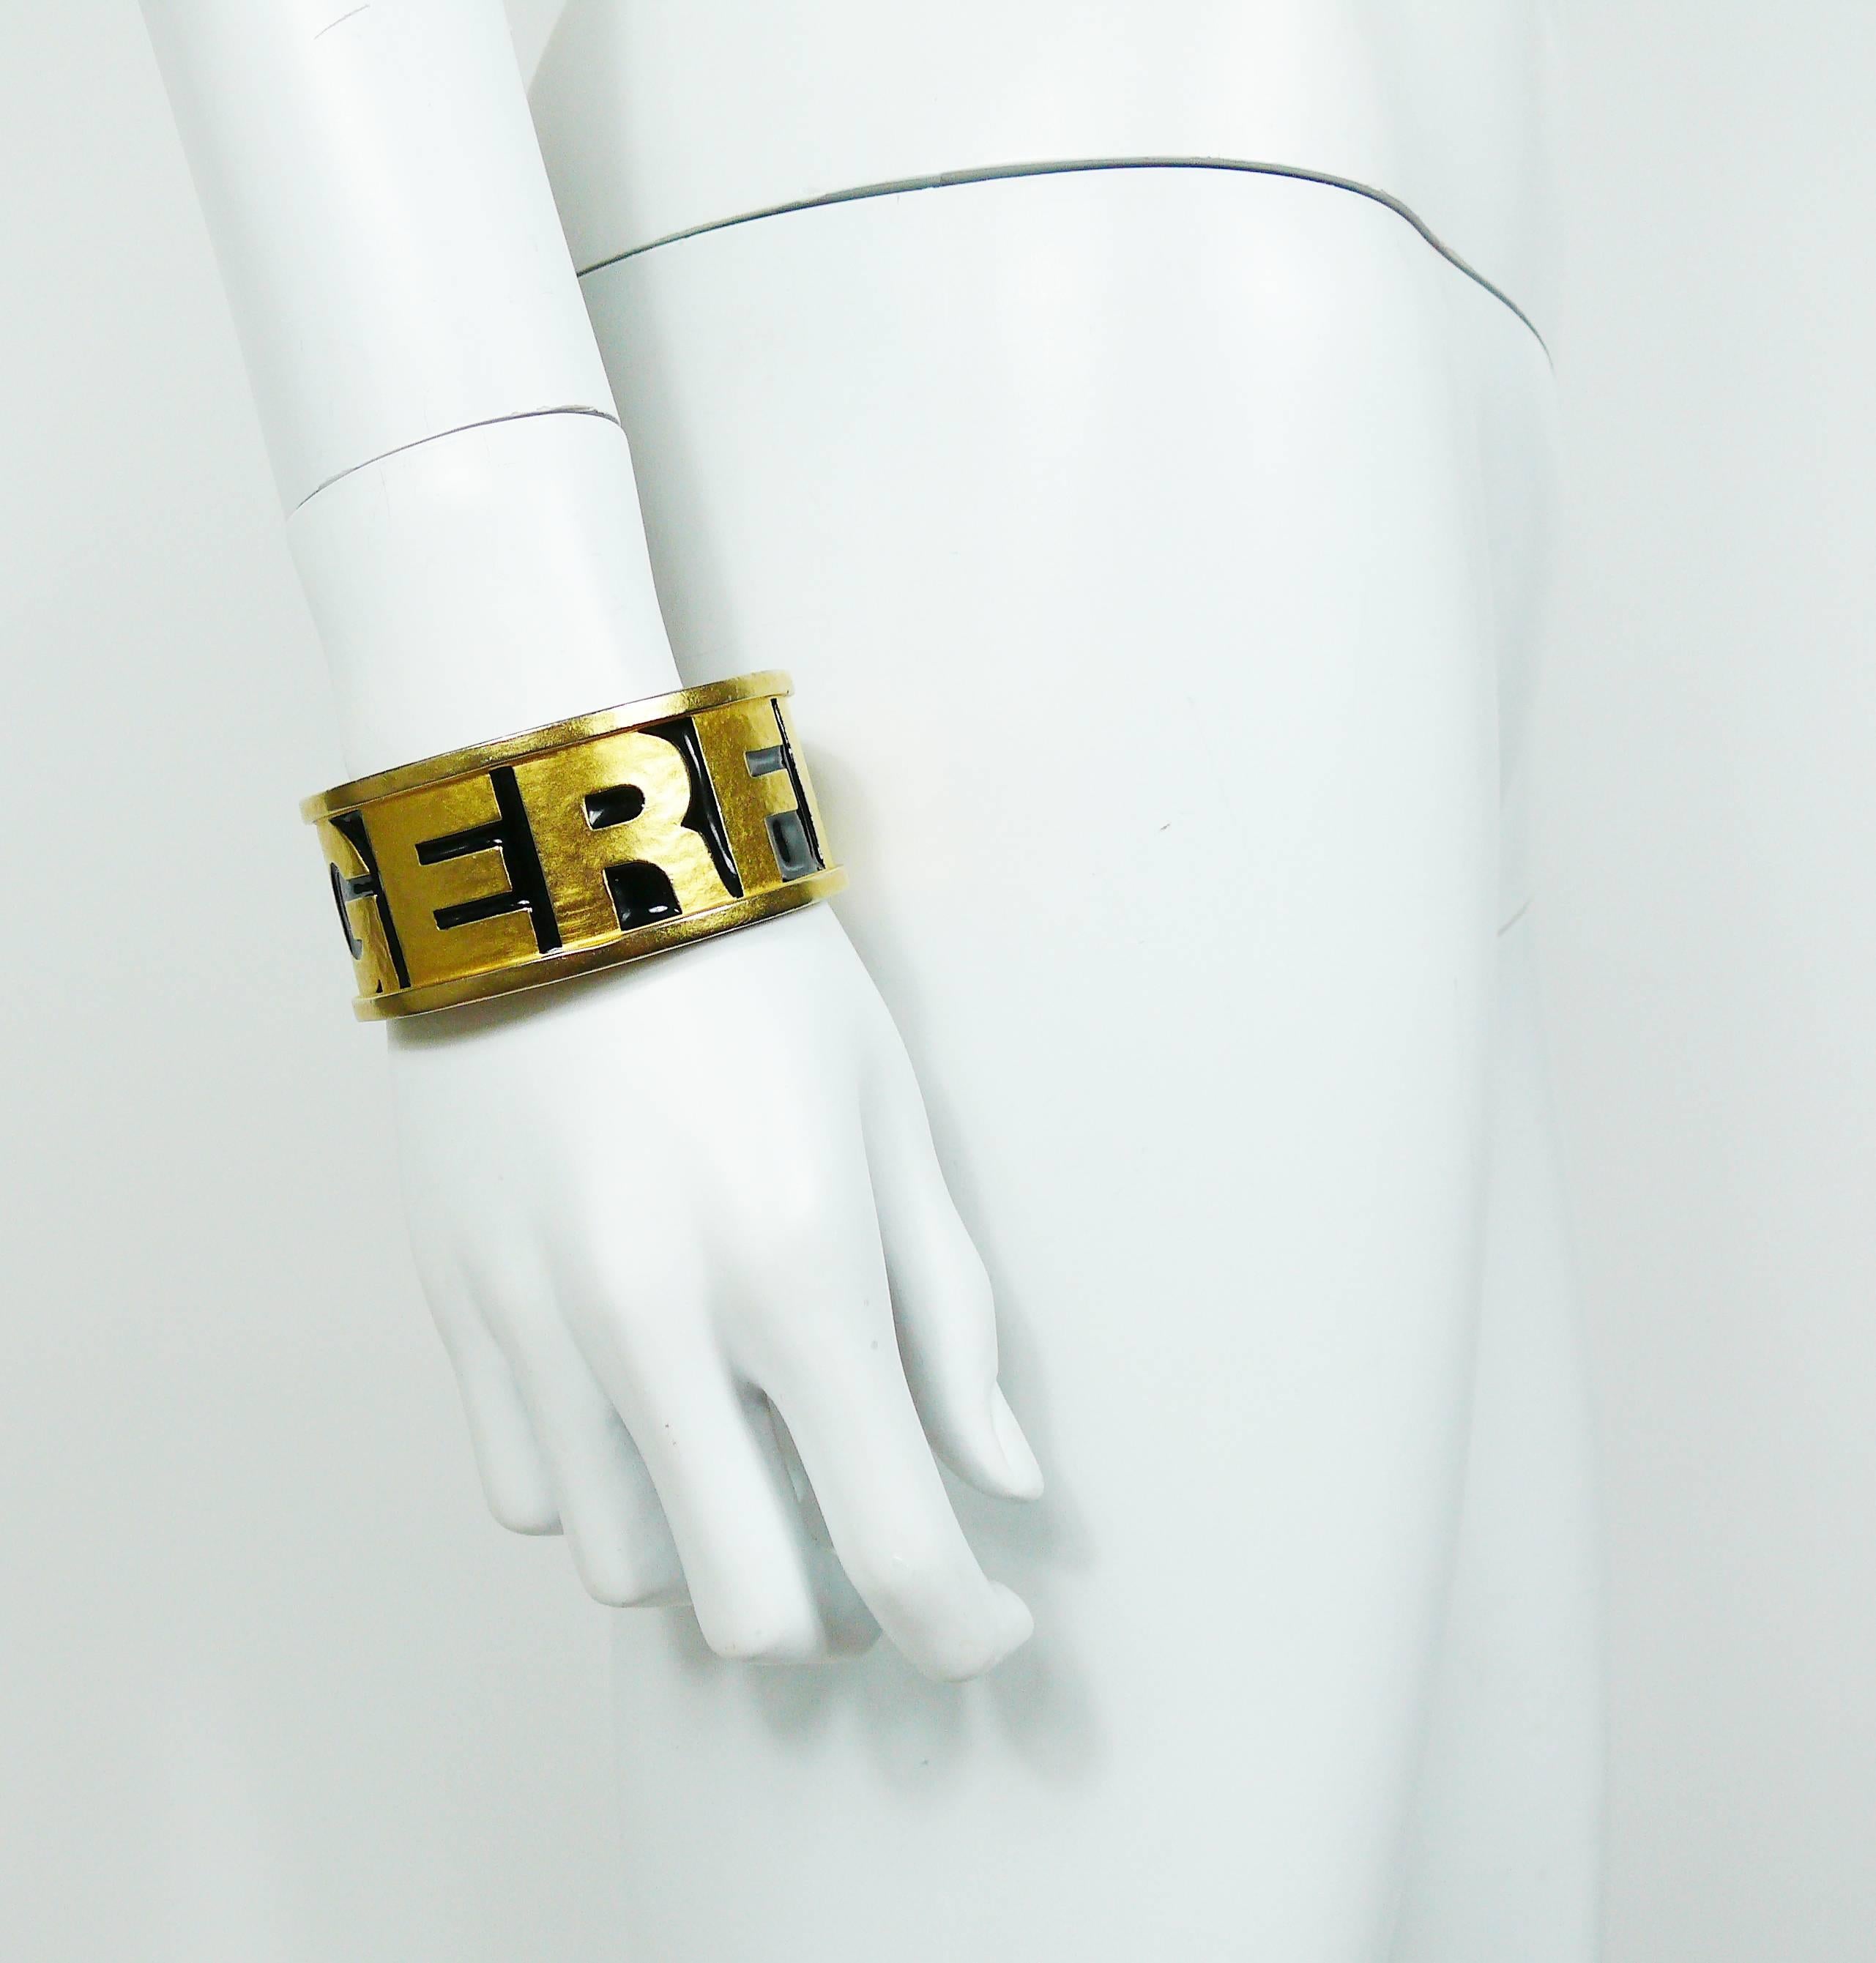 KARL LAGERFELD vintage iconic cuff bracelet featuring textured gold tone 